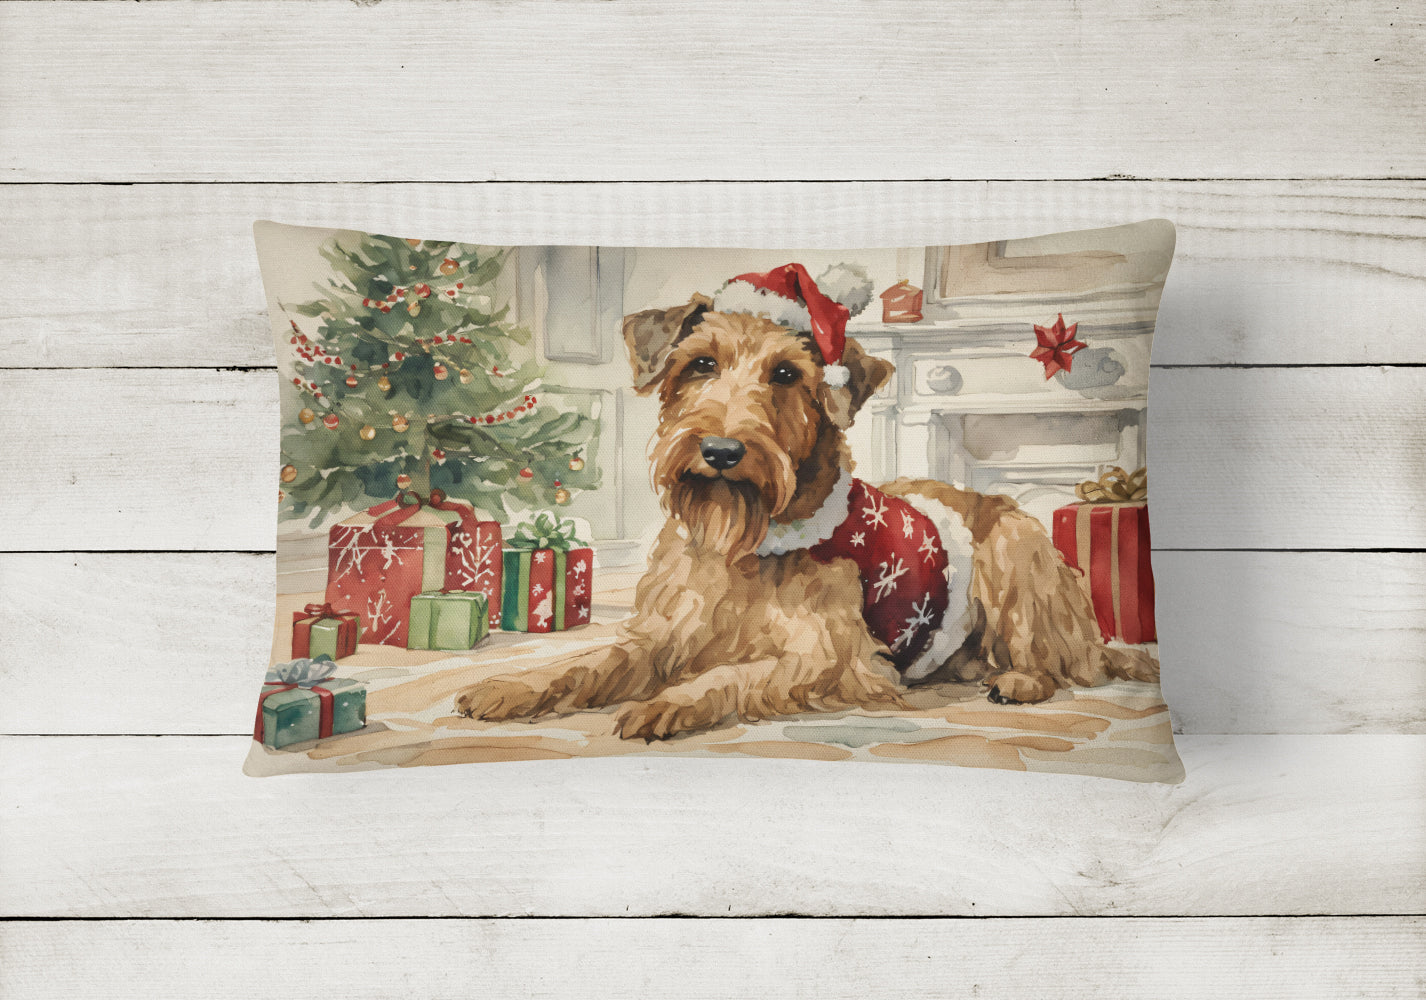 Buy this Airedale Terrier Christmas Fabric Decorative Pillow